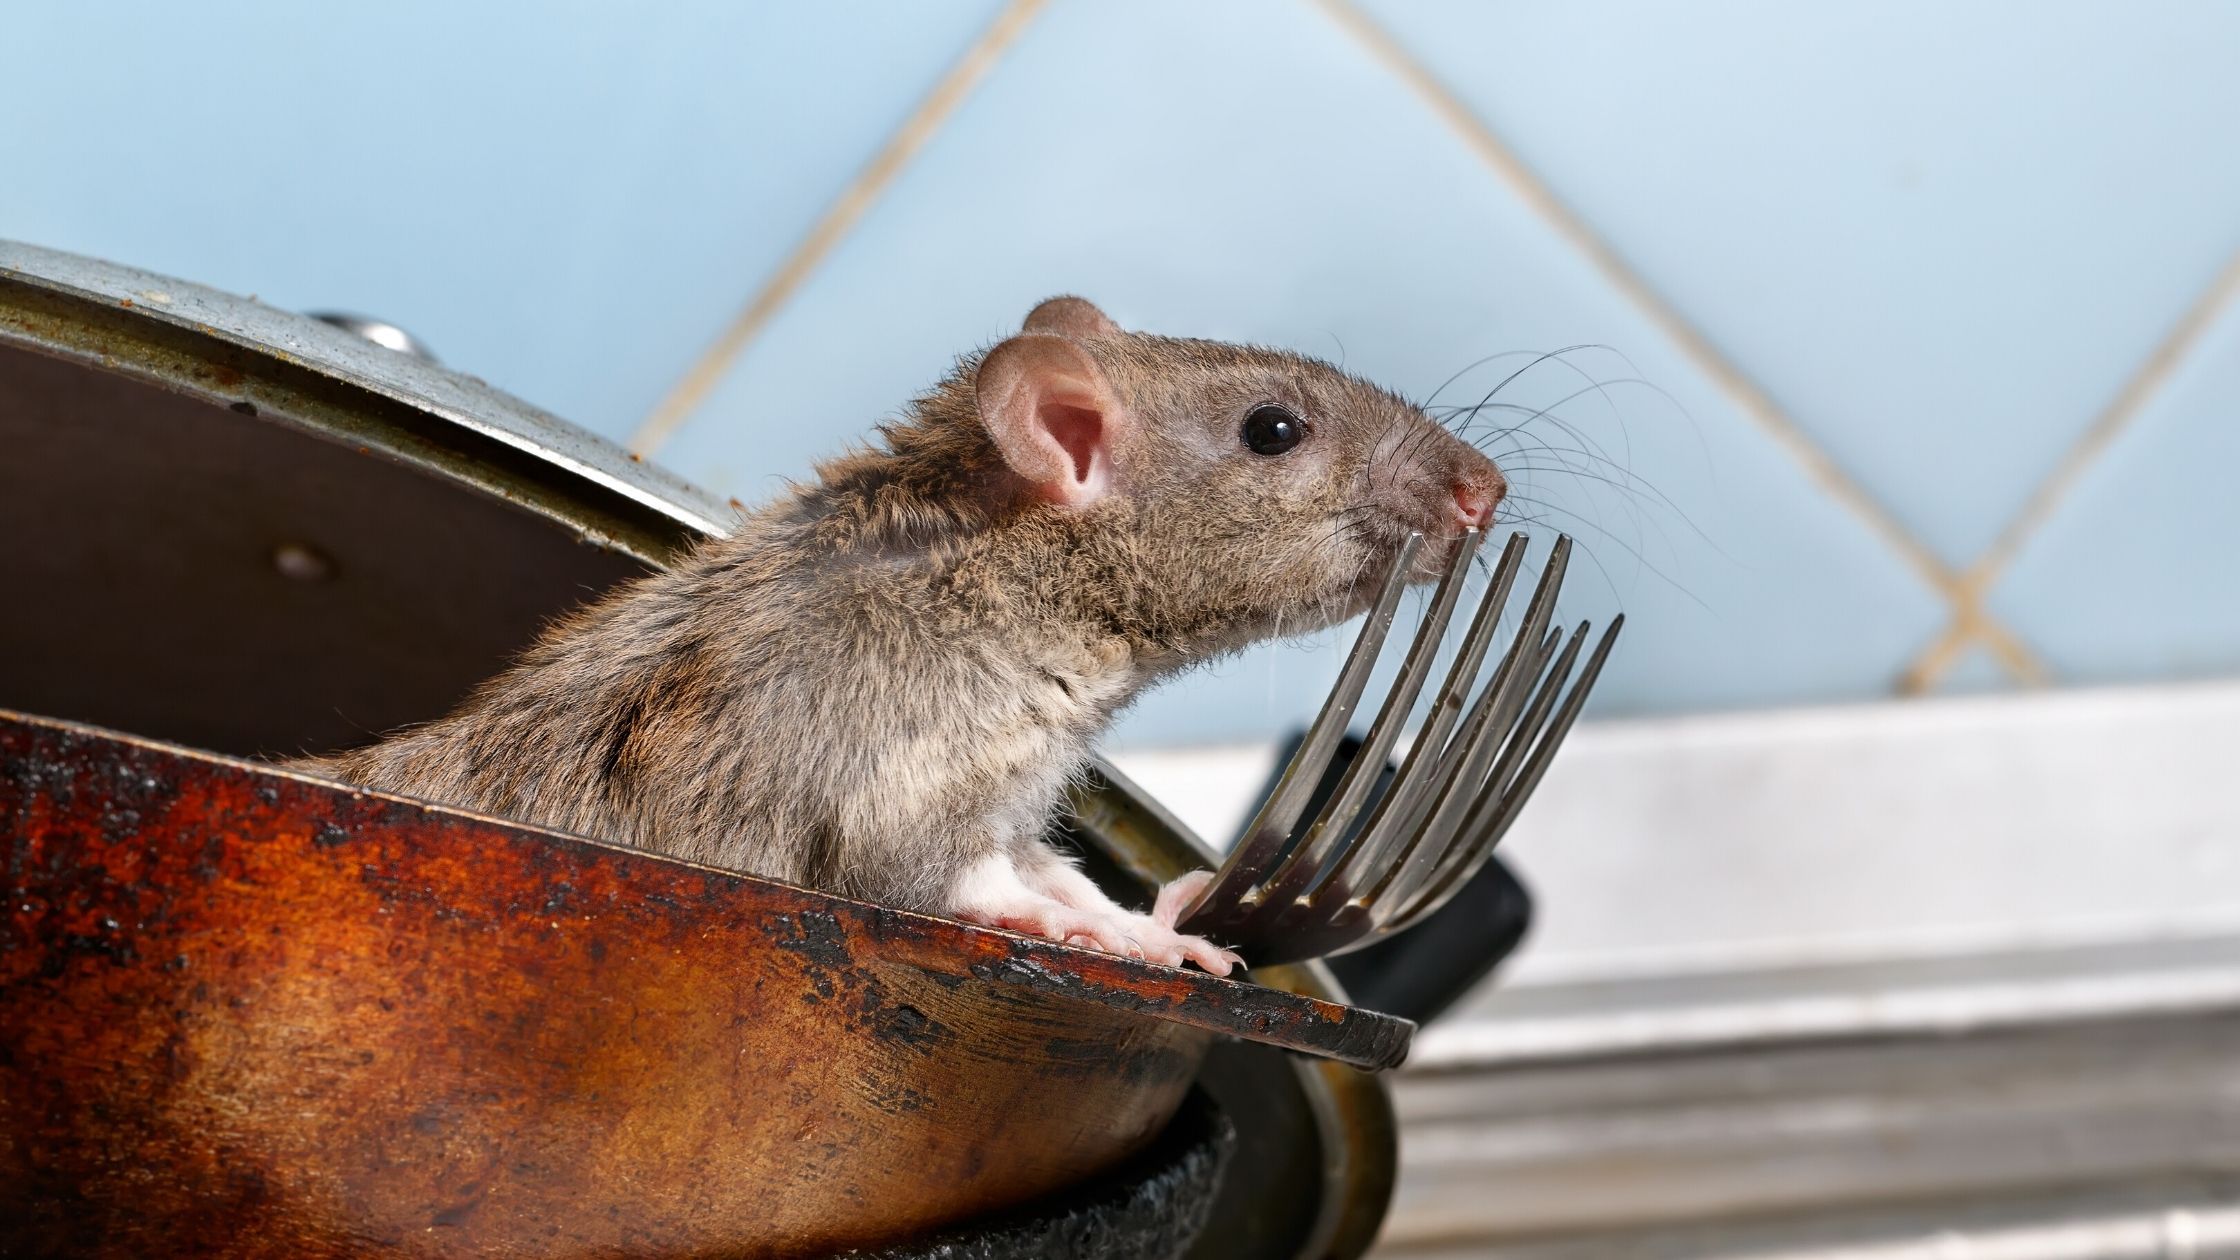 https://www.turnerpest.com/wp-content/uploads/2020/07/rodent-removal-your-business.jpg